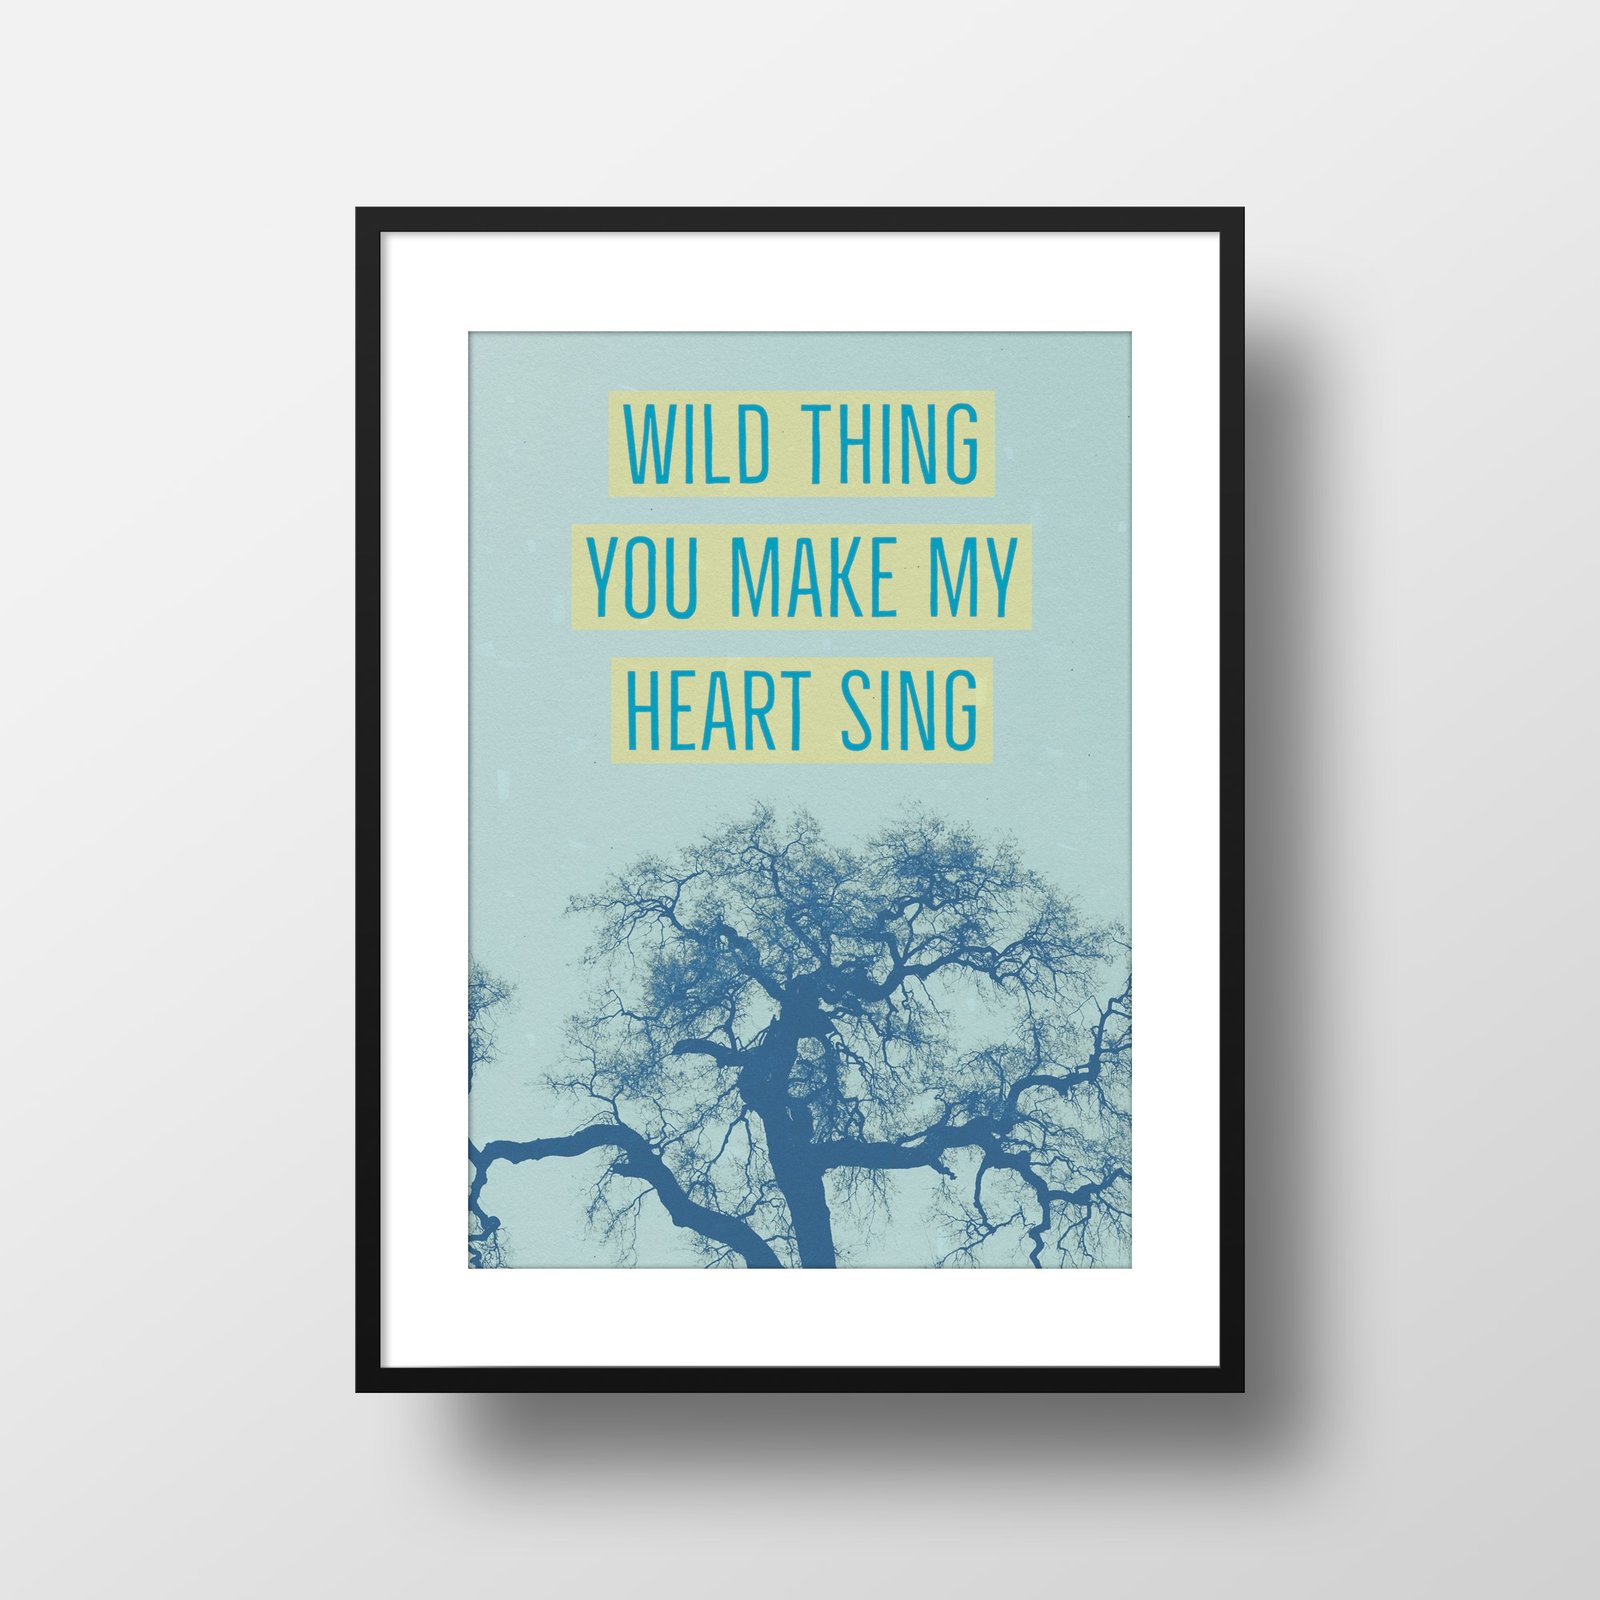 who sings wild thing you make my heart sing